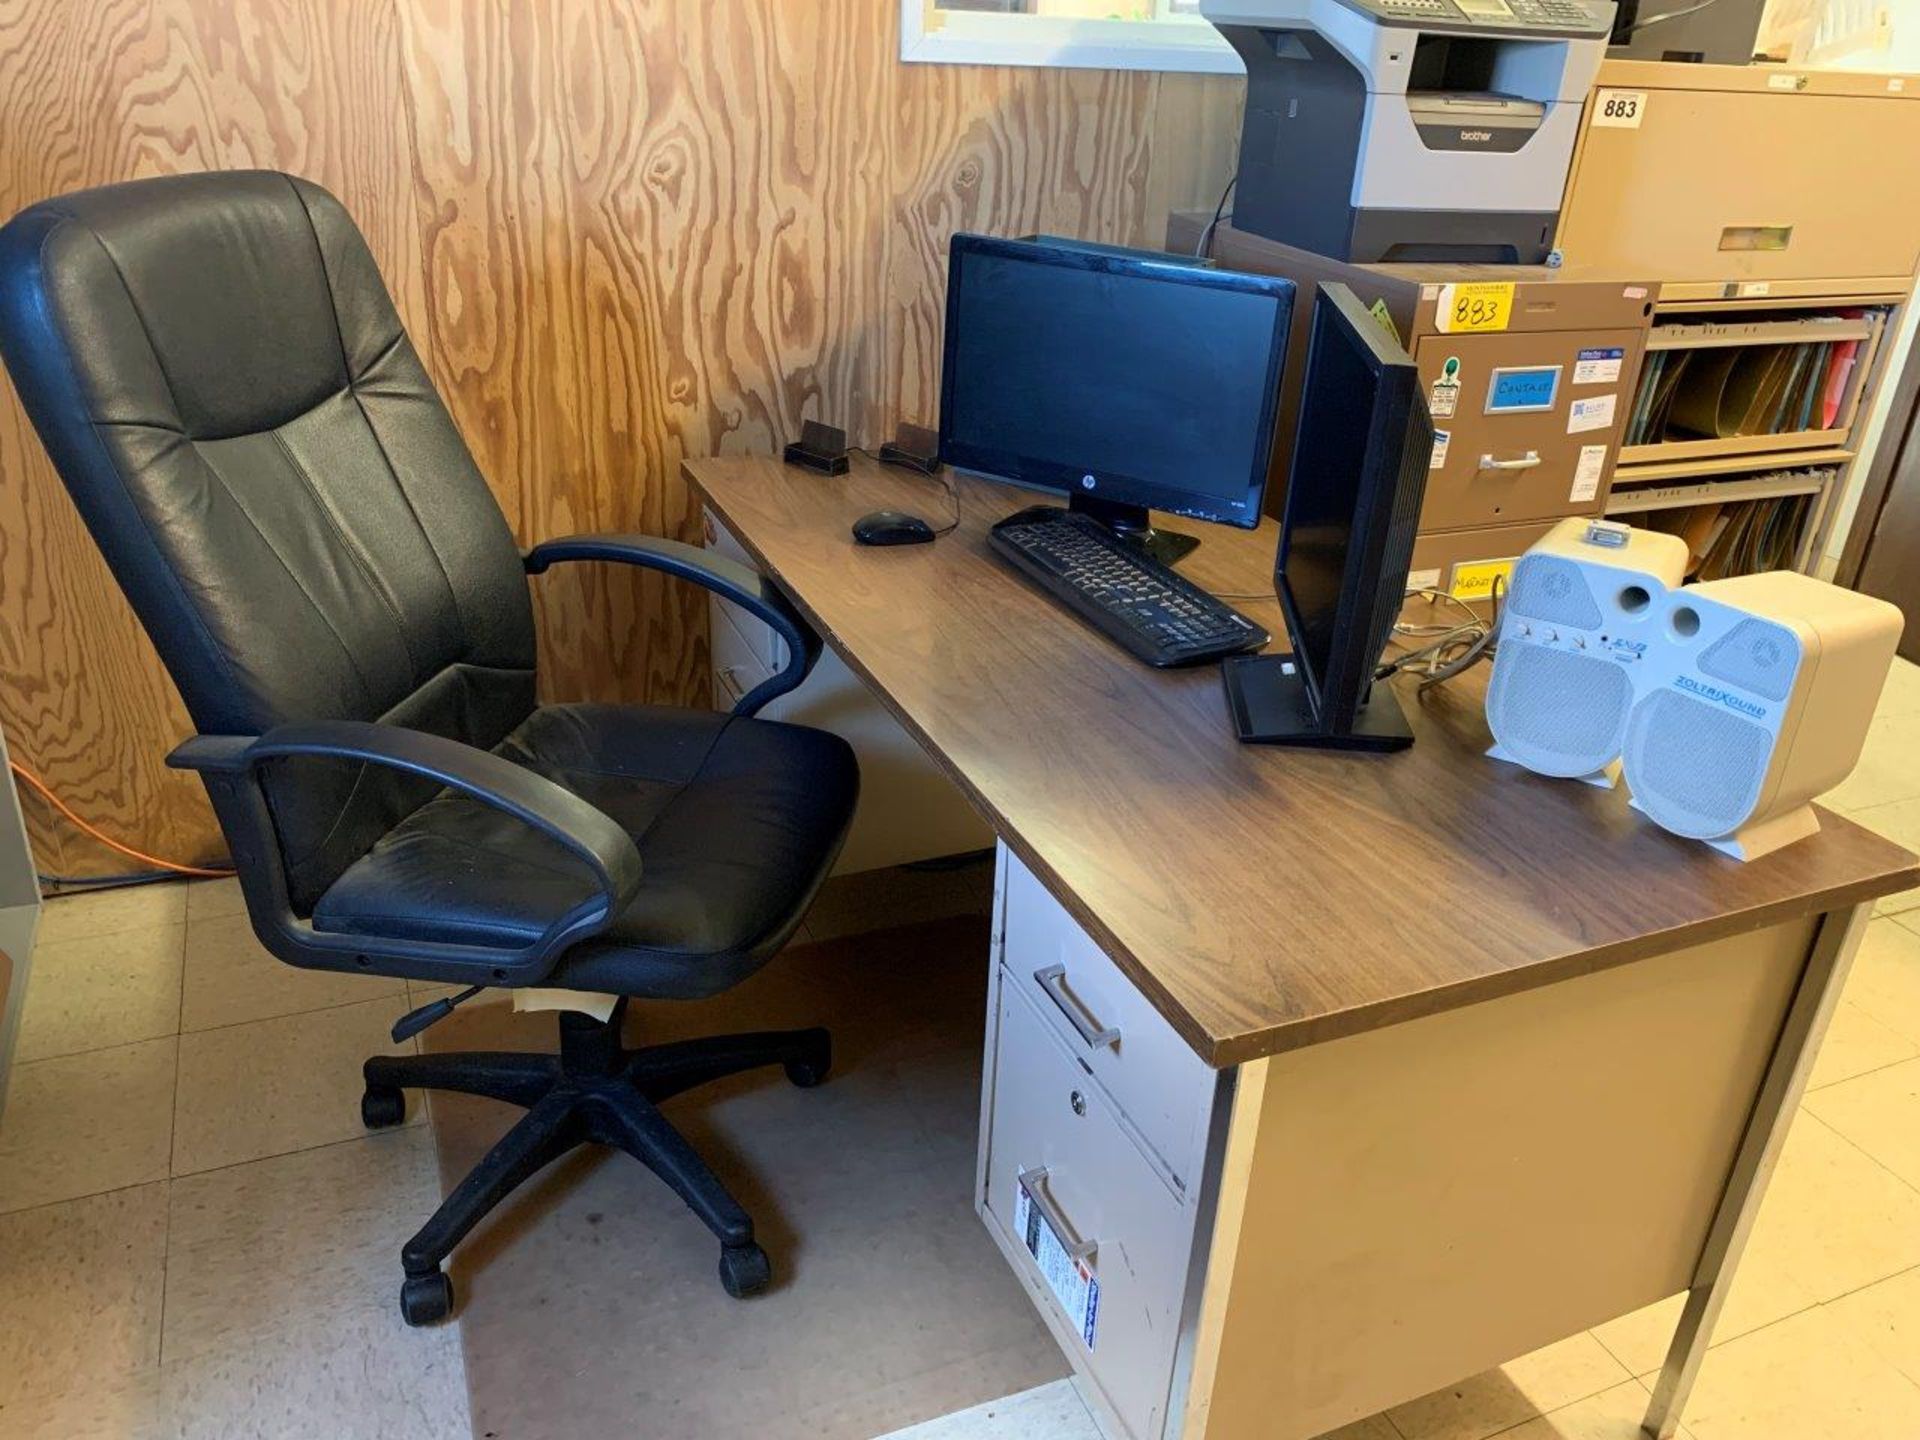 METAL OFFICE DESK W/ P-LAM TOP 60"W X 30"W X 28.5"H, OFFICE CHAIR (CONTENTS NOT INCLUDED)